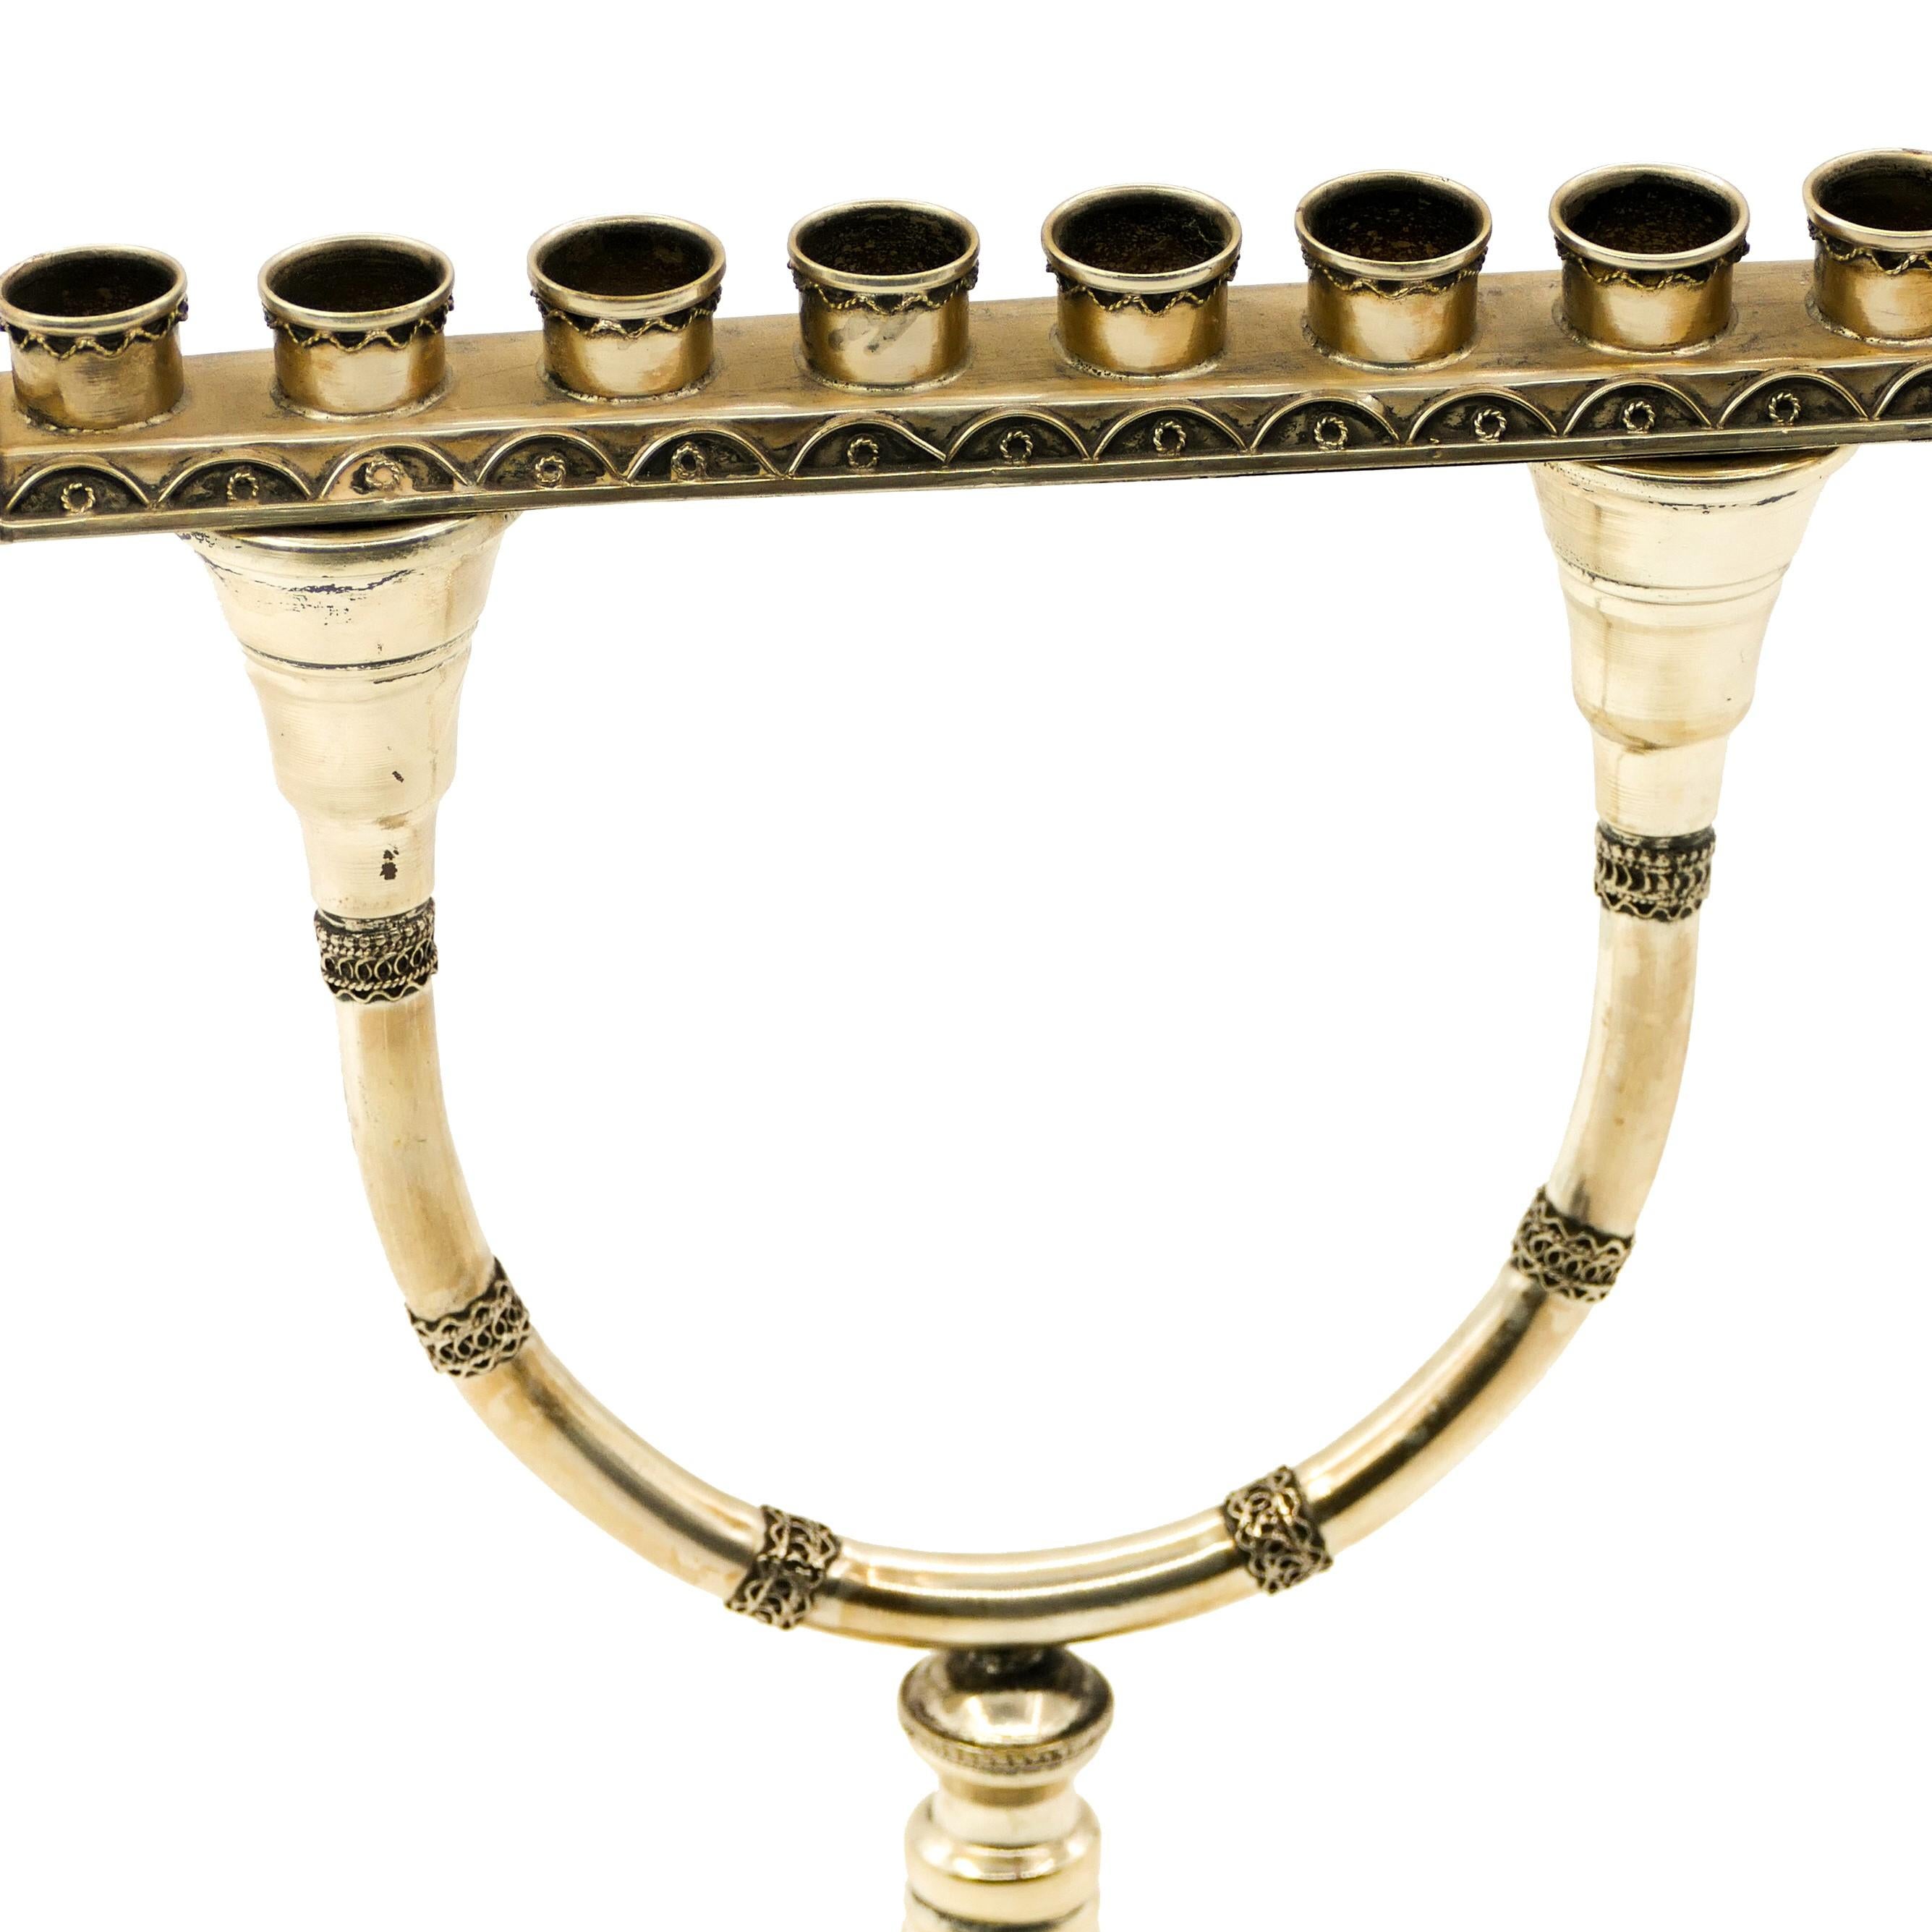 Unknown Hannukkah Menorah Silver Candlestick, Early 20th Century